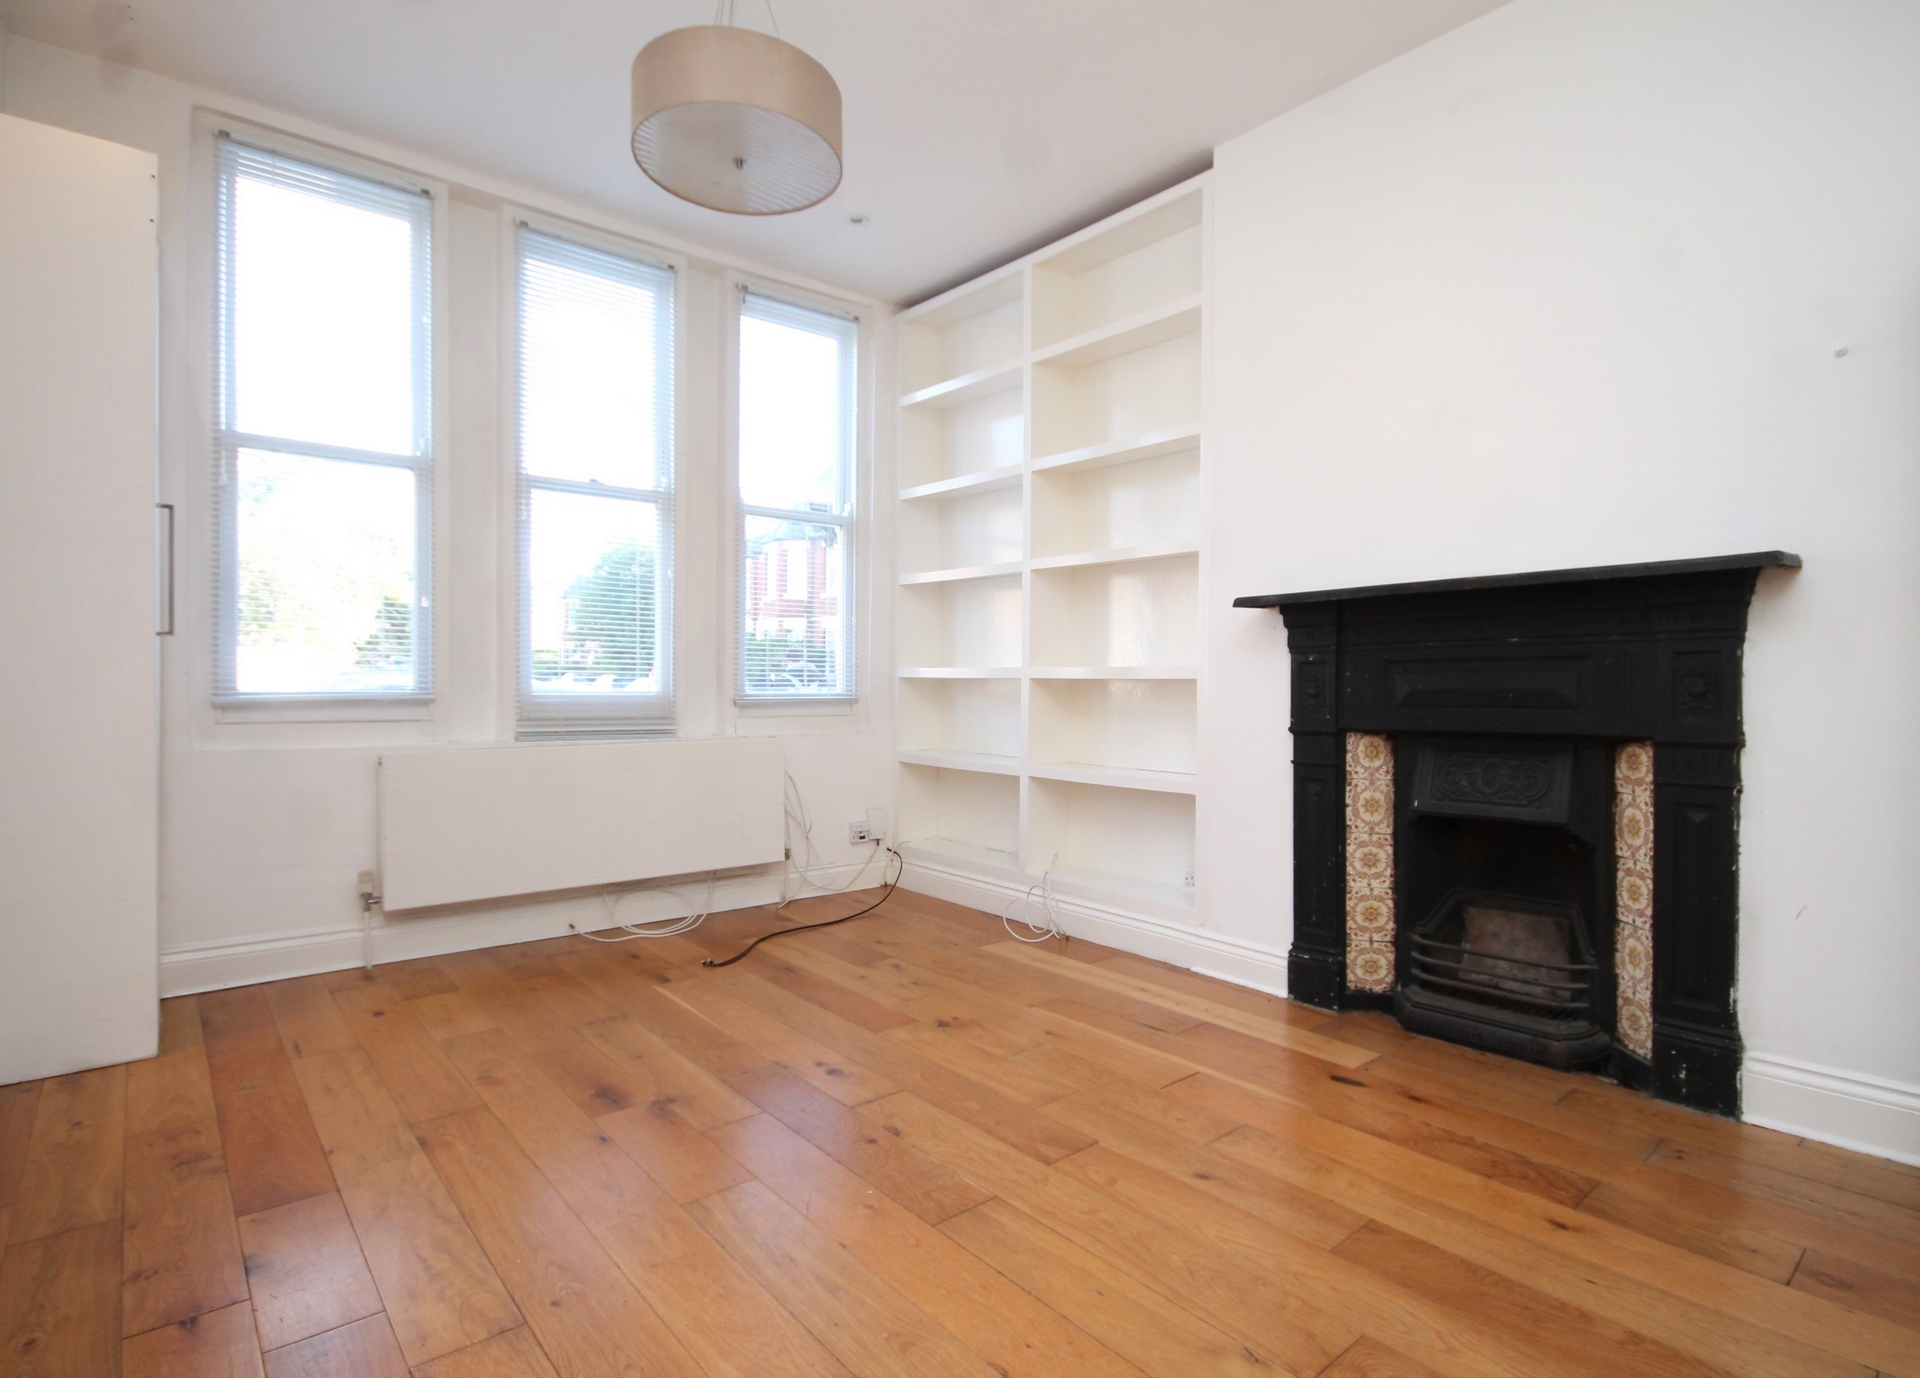 2 Bedroom Flat to rent in Crouch End, London, N8